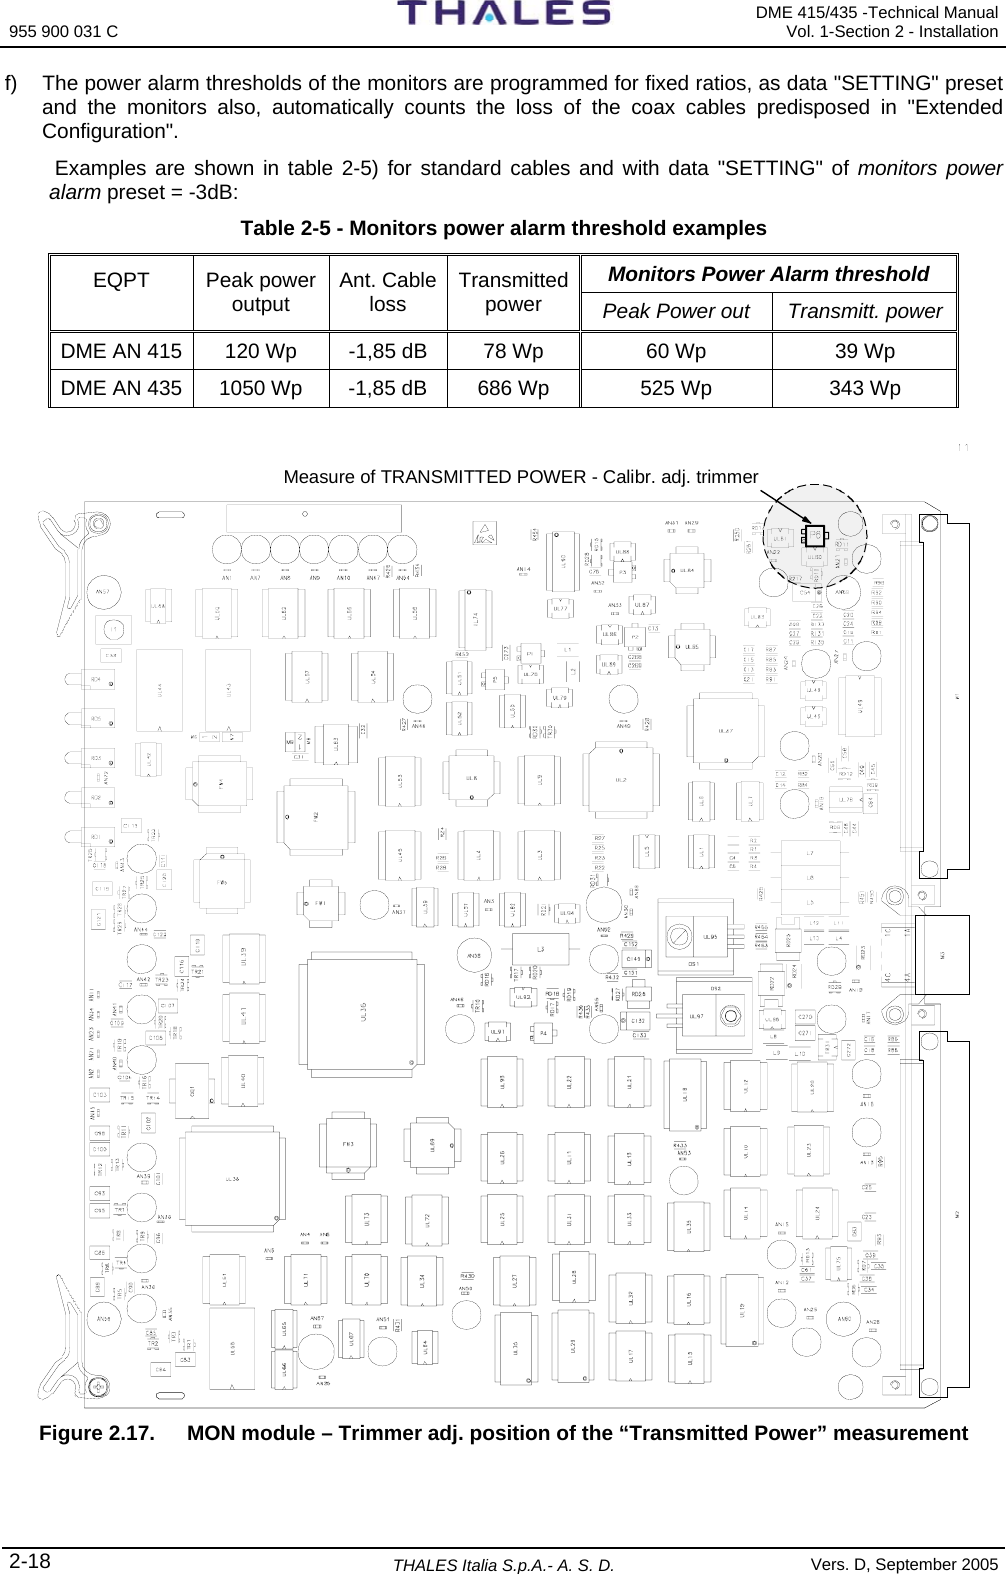 955 900 031 C   DME 415/435 -Technical Manual Vol. 1-Section 2 - Installation 2-18 THALES Italia S.p.A.- A. S. D. Vers. D, September 2005 f)  The power alarm thresholds of the monitors are programmed for fixed ratios, as data &quot;SETTING&quot; preset and the monitors also, automatically counts the loss of the coax cables predisposed in &quot;Extended Configuration&quot;.  Examples are shown in table 2-5) for standard cables and with data &quot;SETTING&quot; of monitors power alarm preset = -3dB: Table 2-5 - Monitors power alarm threshold examples Monitors Power Alarm threshold EQPT Peak power output  Ant. Cable loss  Transmitted power  Peak Power out  Transmitt. power DME AN 415  120 Wp  -1,85 dB  78 Wp  60 Wp  39 Wp DME AN 435  1050 Wp  -1,85 dB  686 Wp  525 Wp  343 Wp  Measure of TRANSMITTED POWER - Calibr. adj. trimmer Figure 2.17.   MON module – Trimmer adj. position of the “Transmitted Power” measurement   